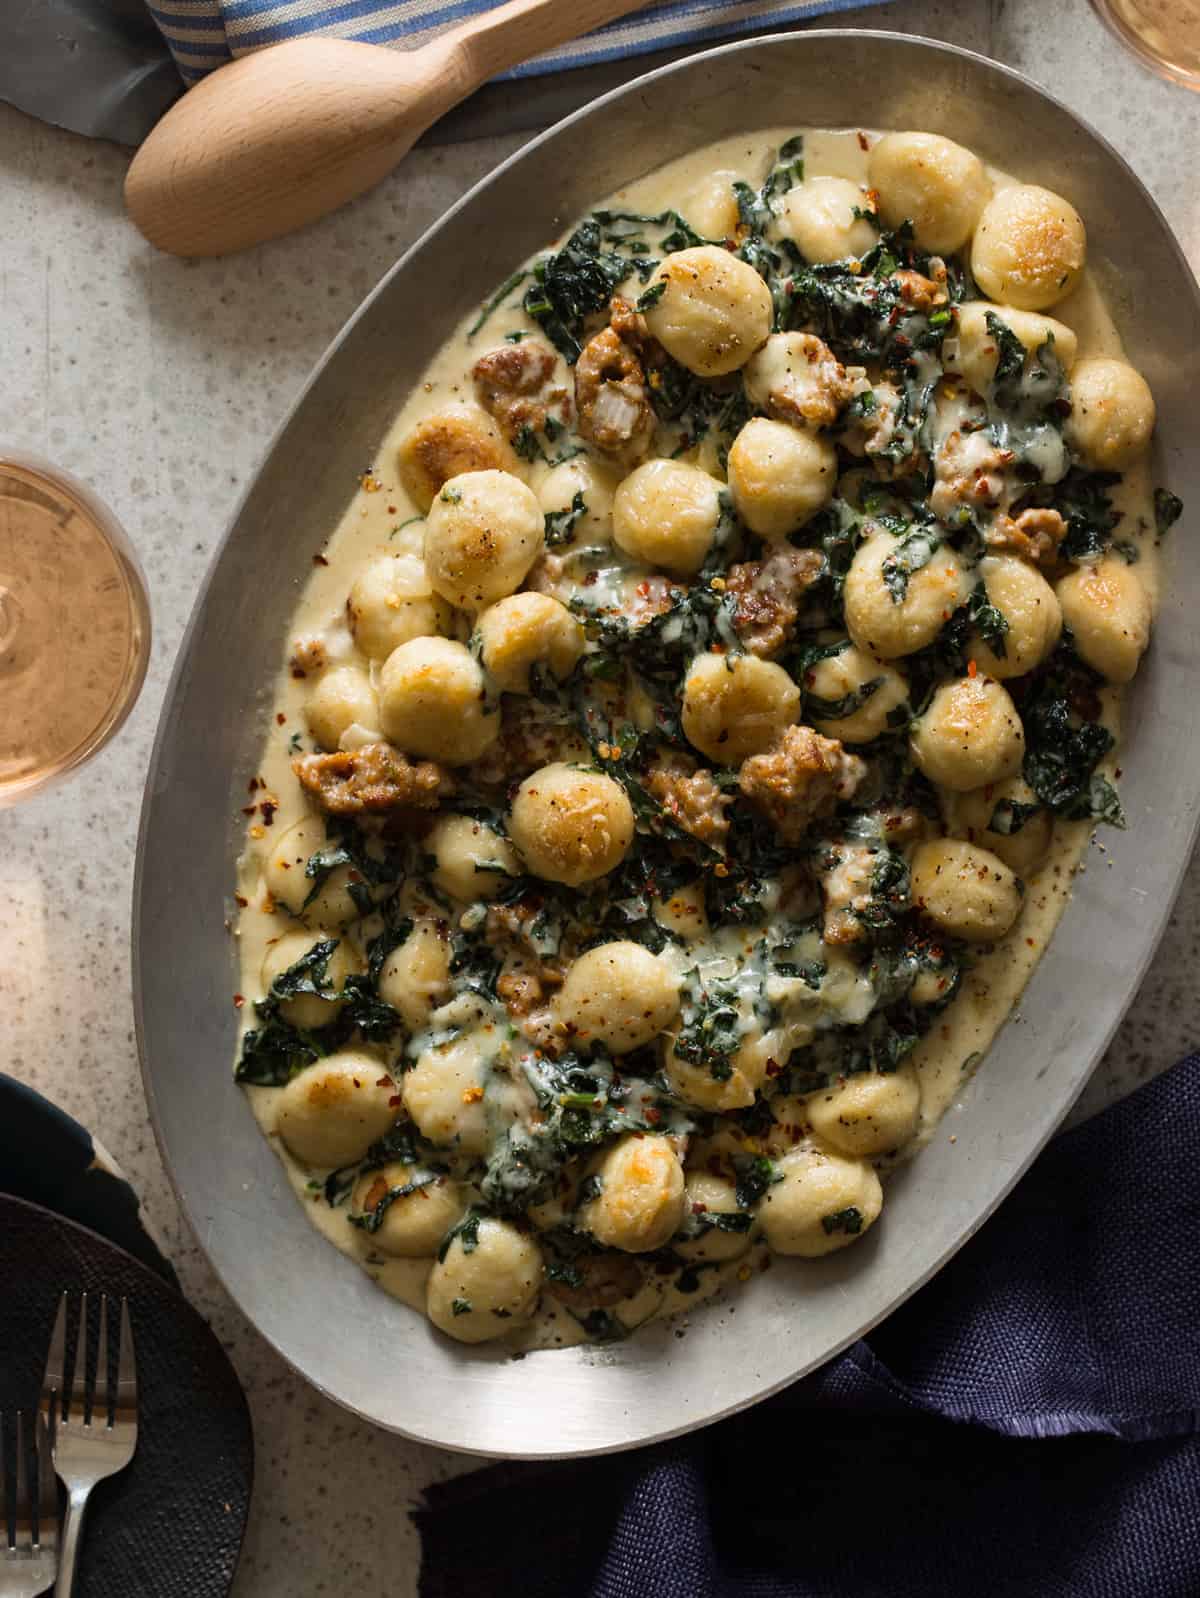 Baked Gnocchi with Kale & Sausage